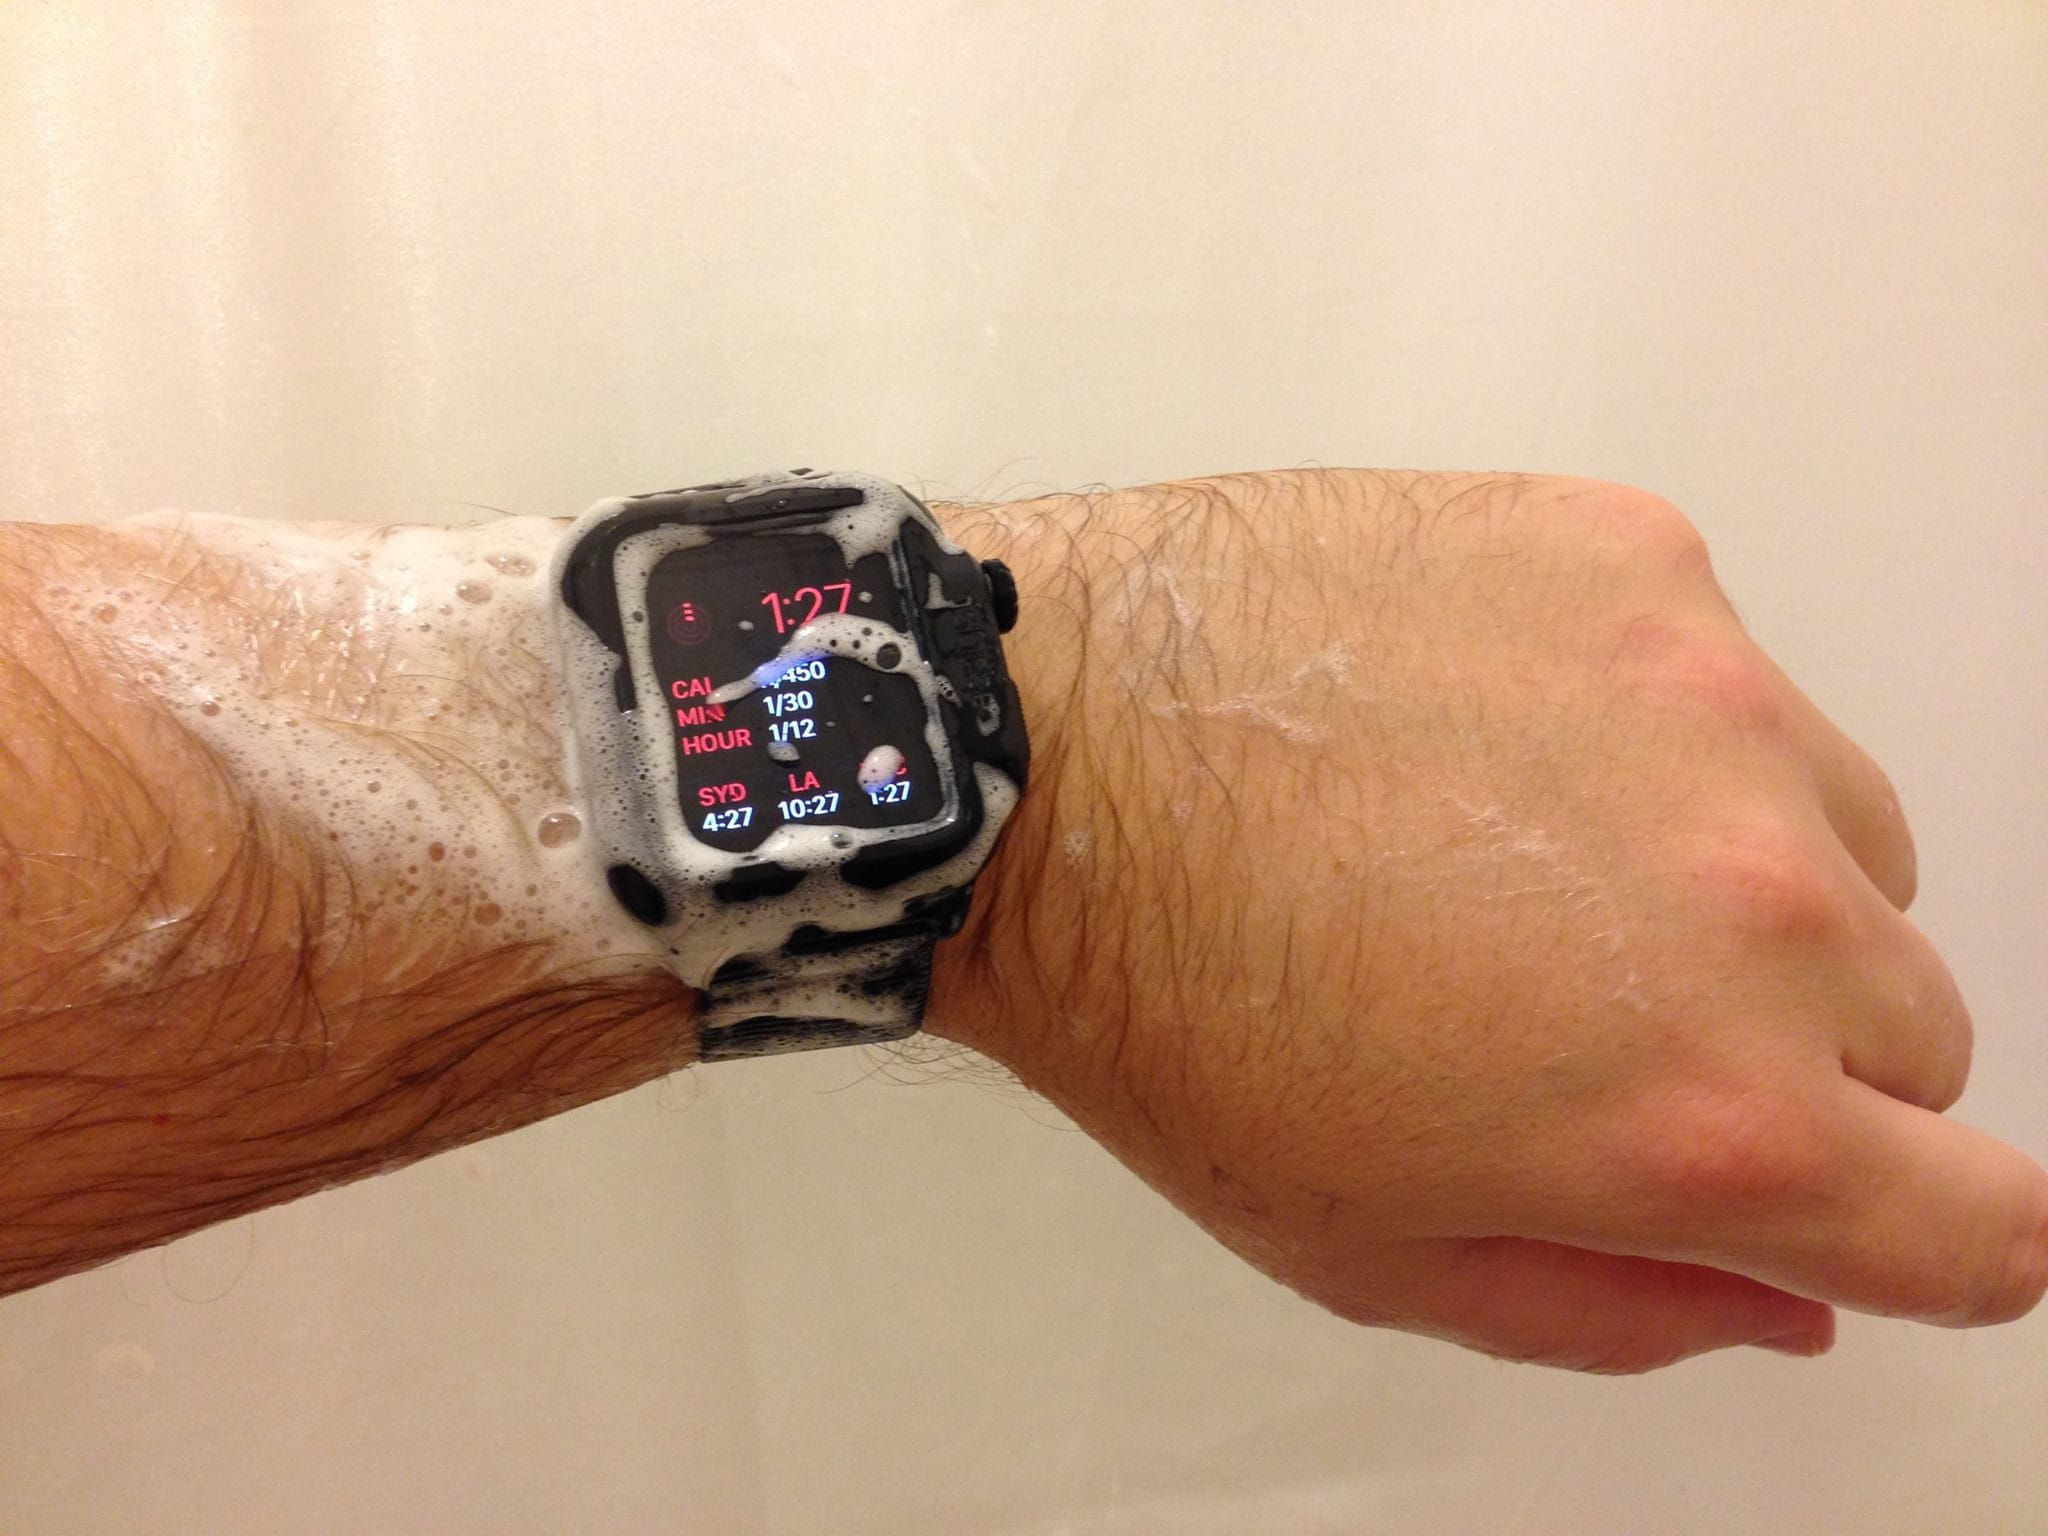 wearing black apple watch while showering and with shampoo on hand